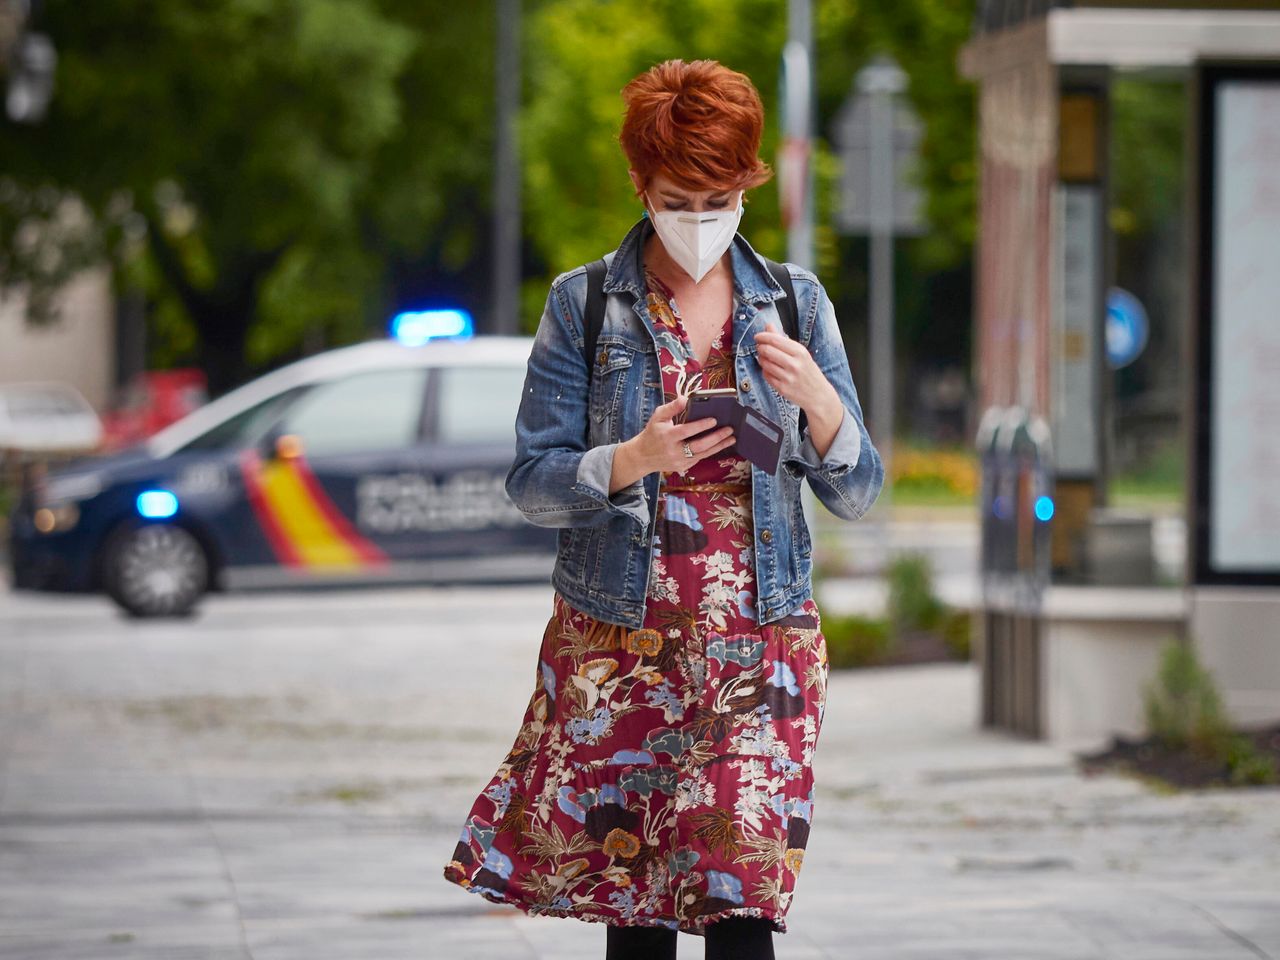 A woman wearing a mask looks at her phone on April 30 in Pamplona, Spain. The Spanish government has unveiled its plan for easing coronavirus lockdown restrictions.